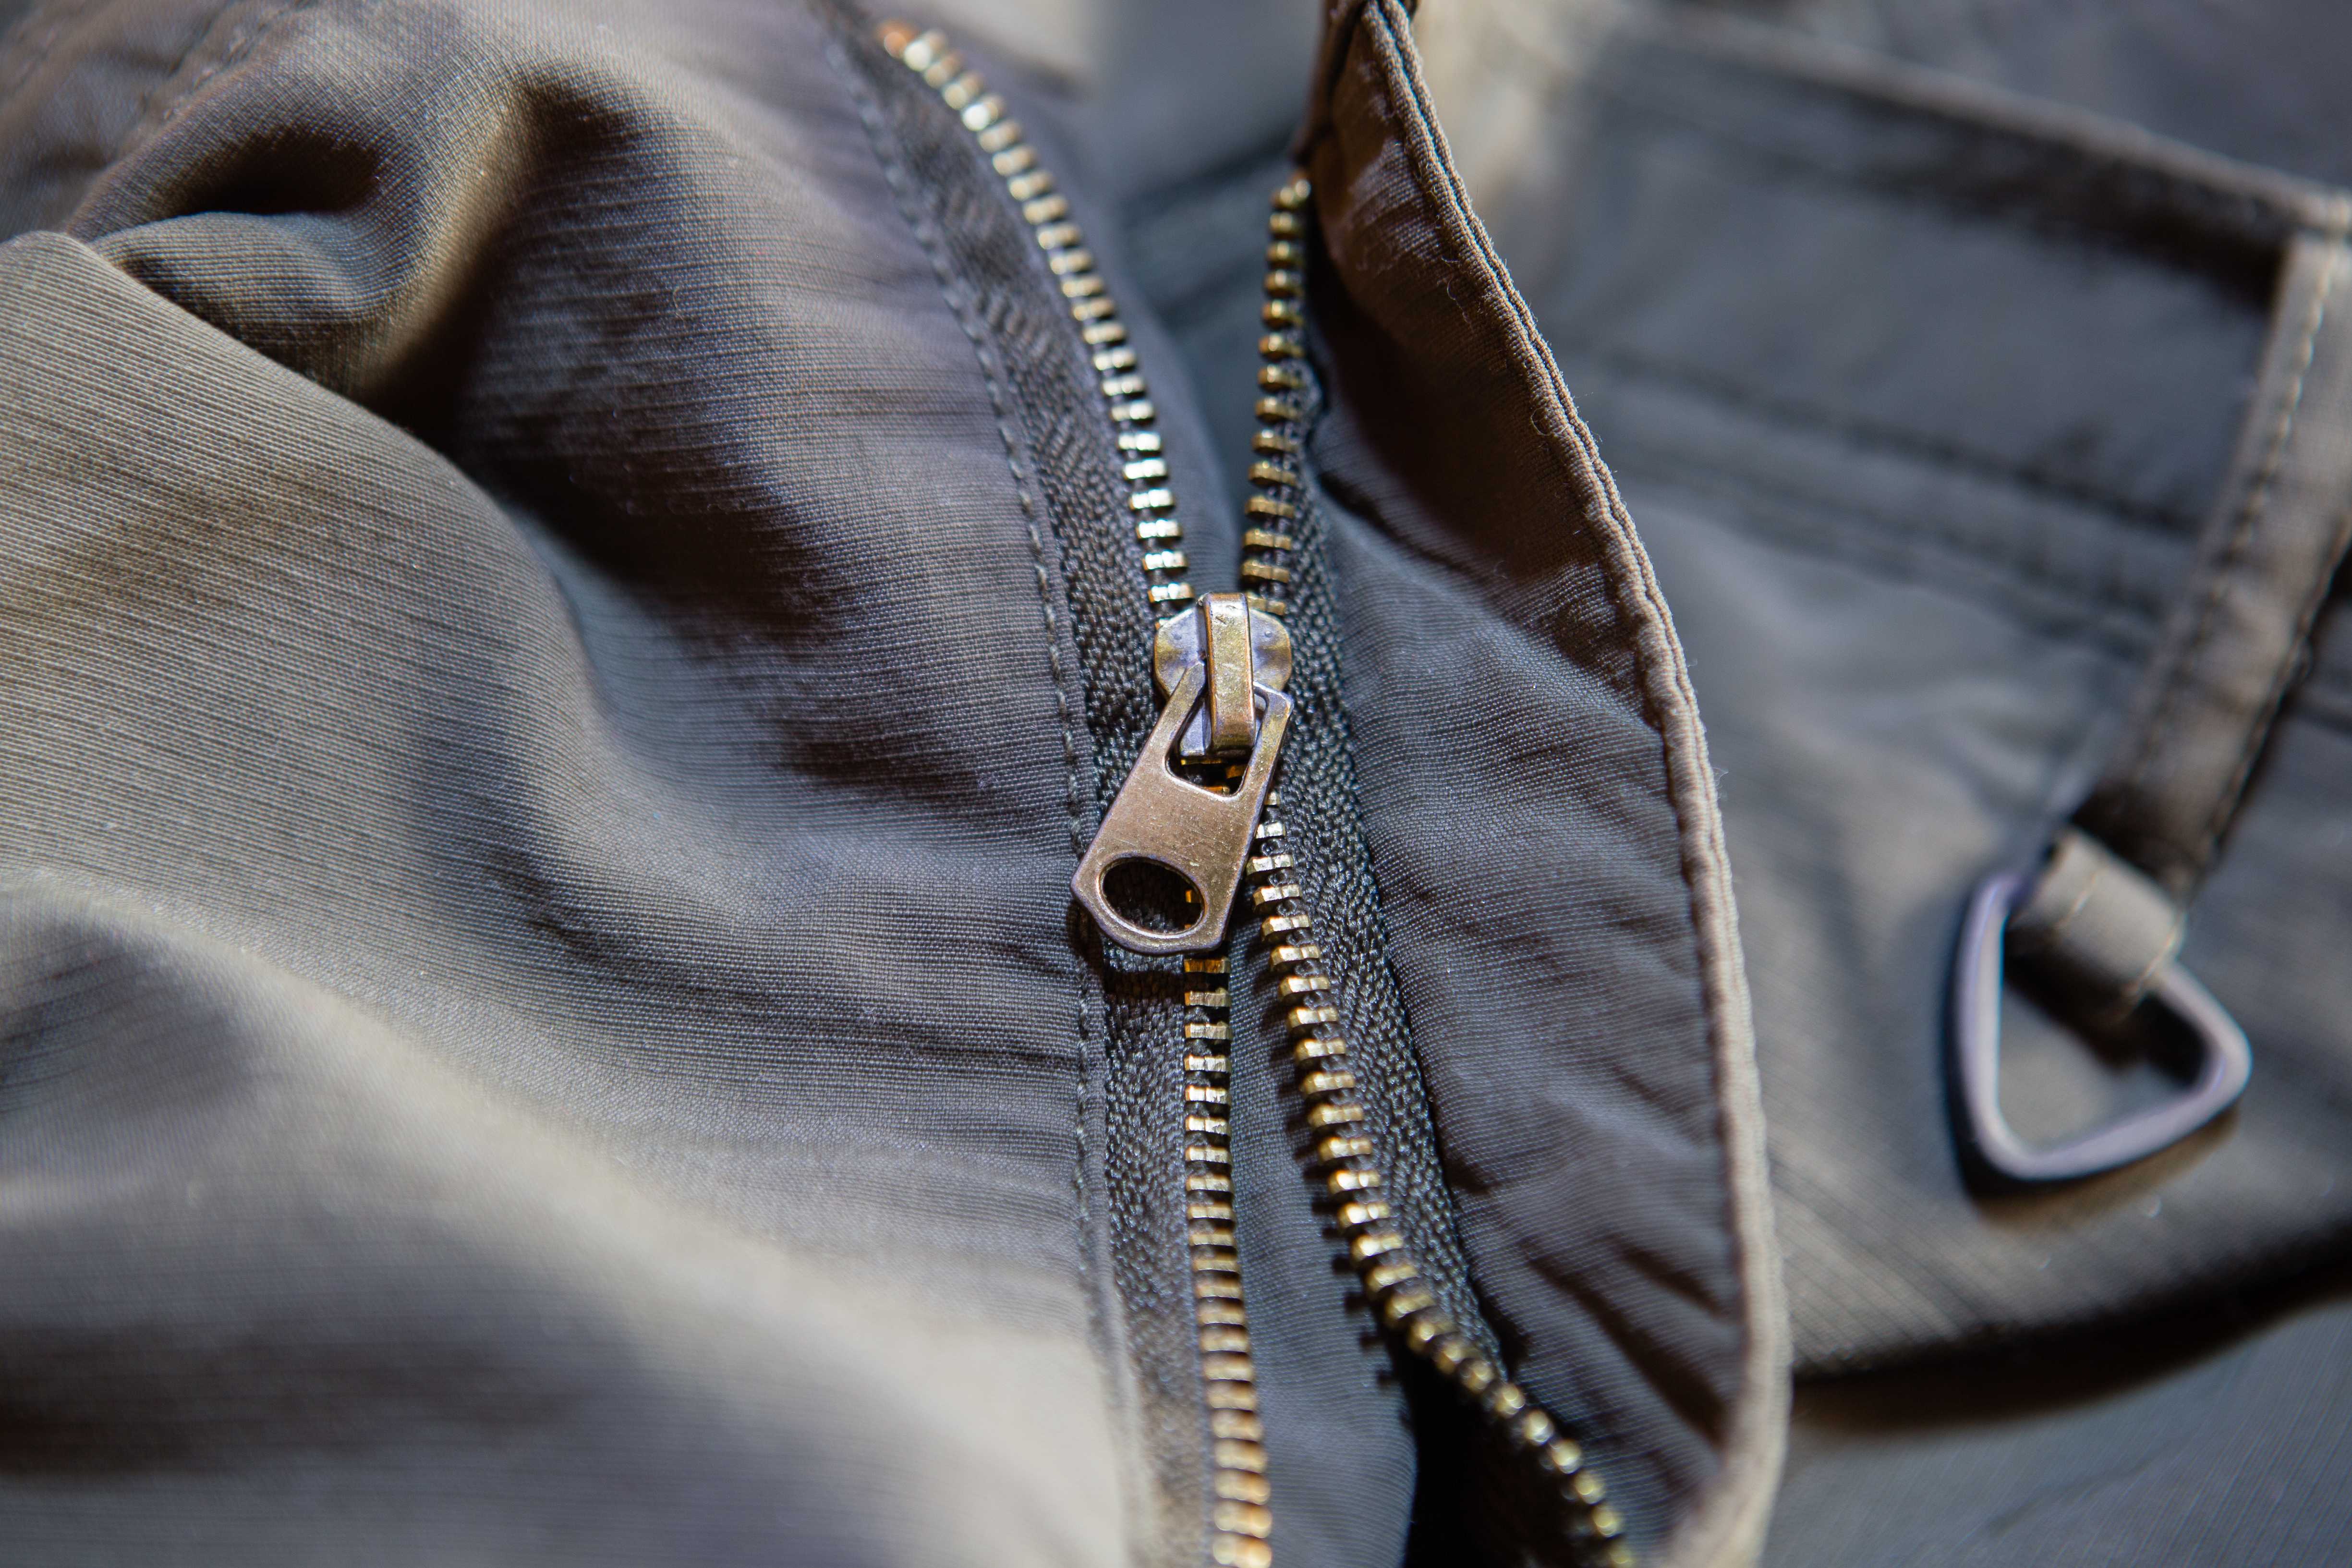 How to fix a zipper which has come off one side and won't fit back on -  Quora